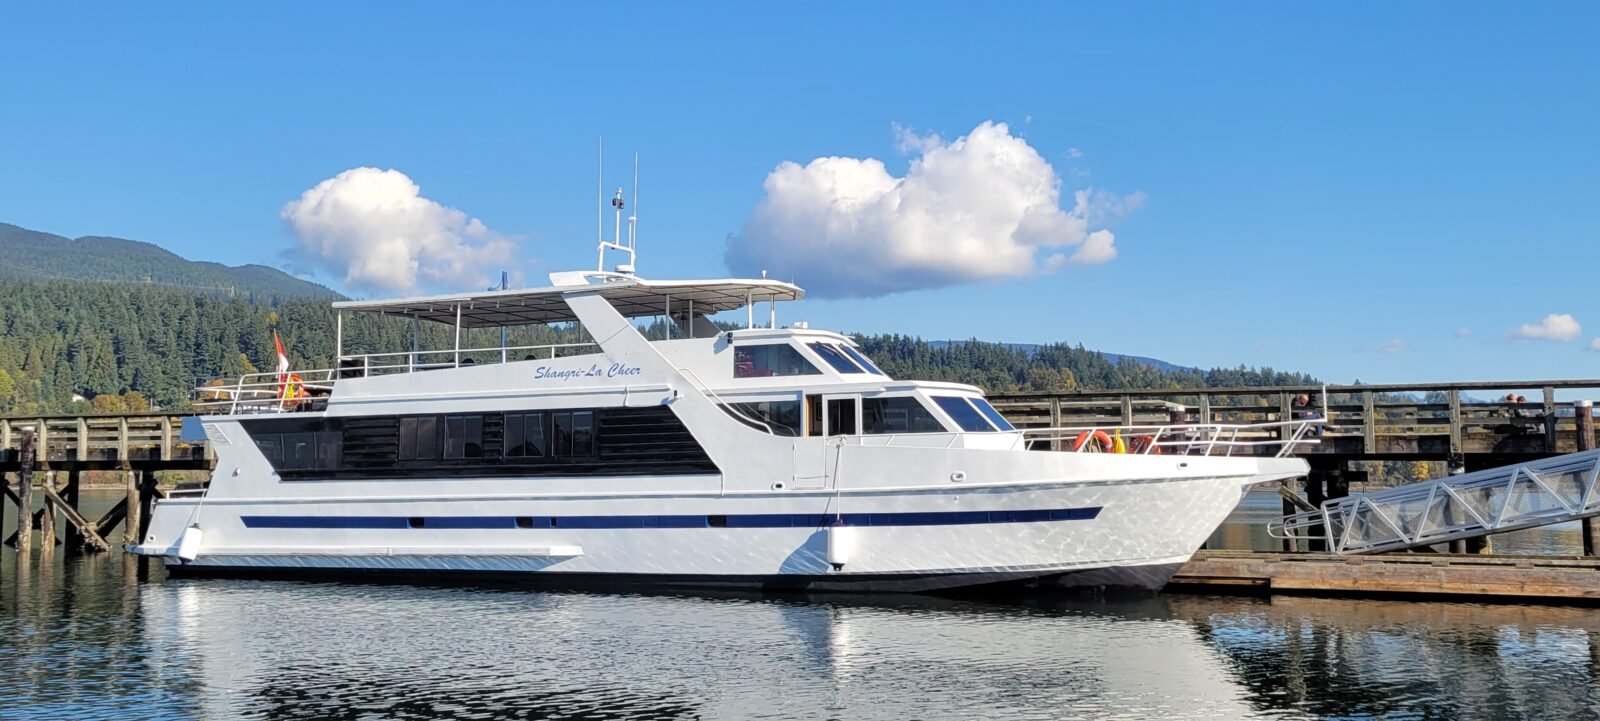 85′ Luxury Party/Event Boat Rental Vancouver (70 passengers max)